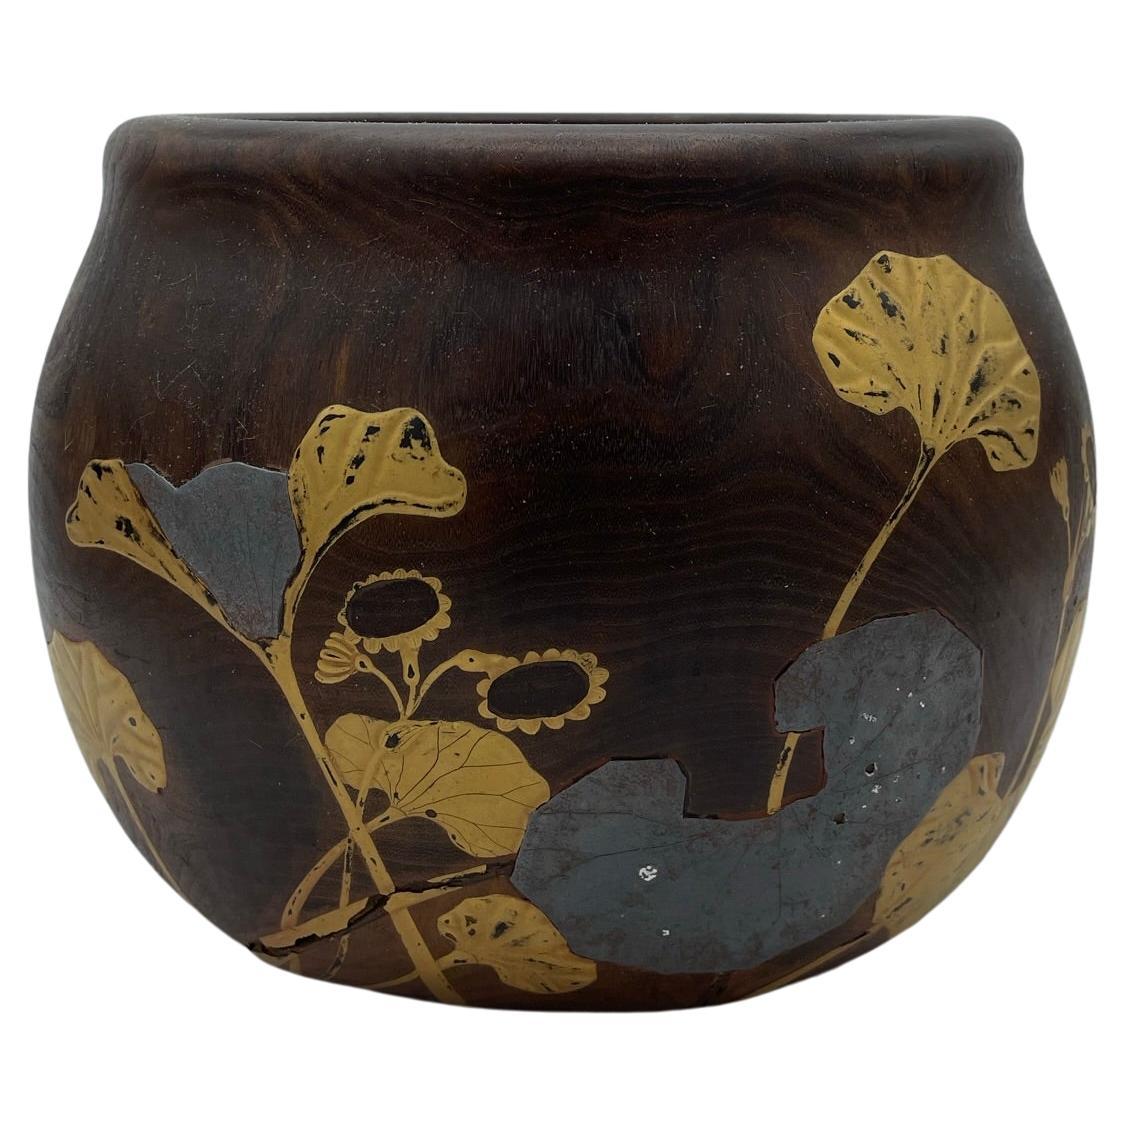 Japanese Wooden Cachepot 1920 'Made from One Tree'